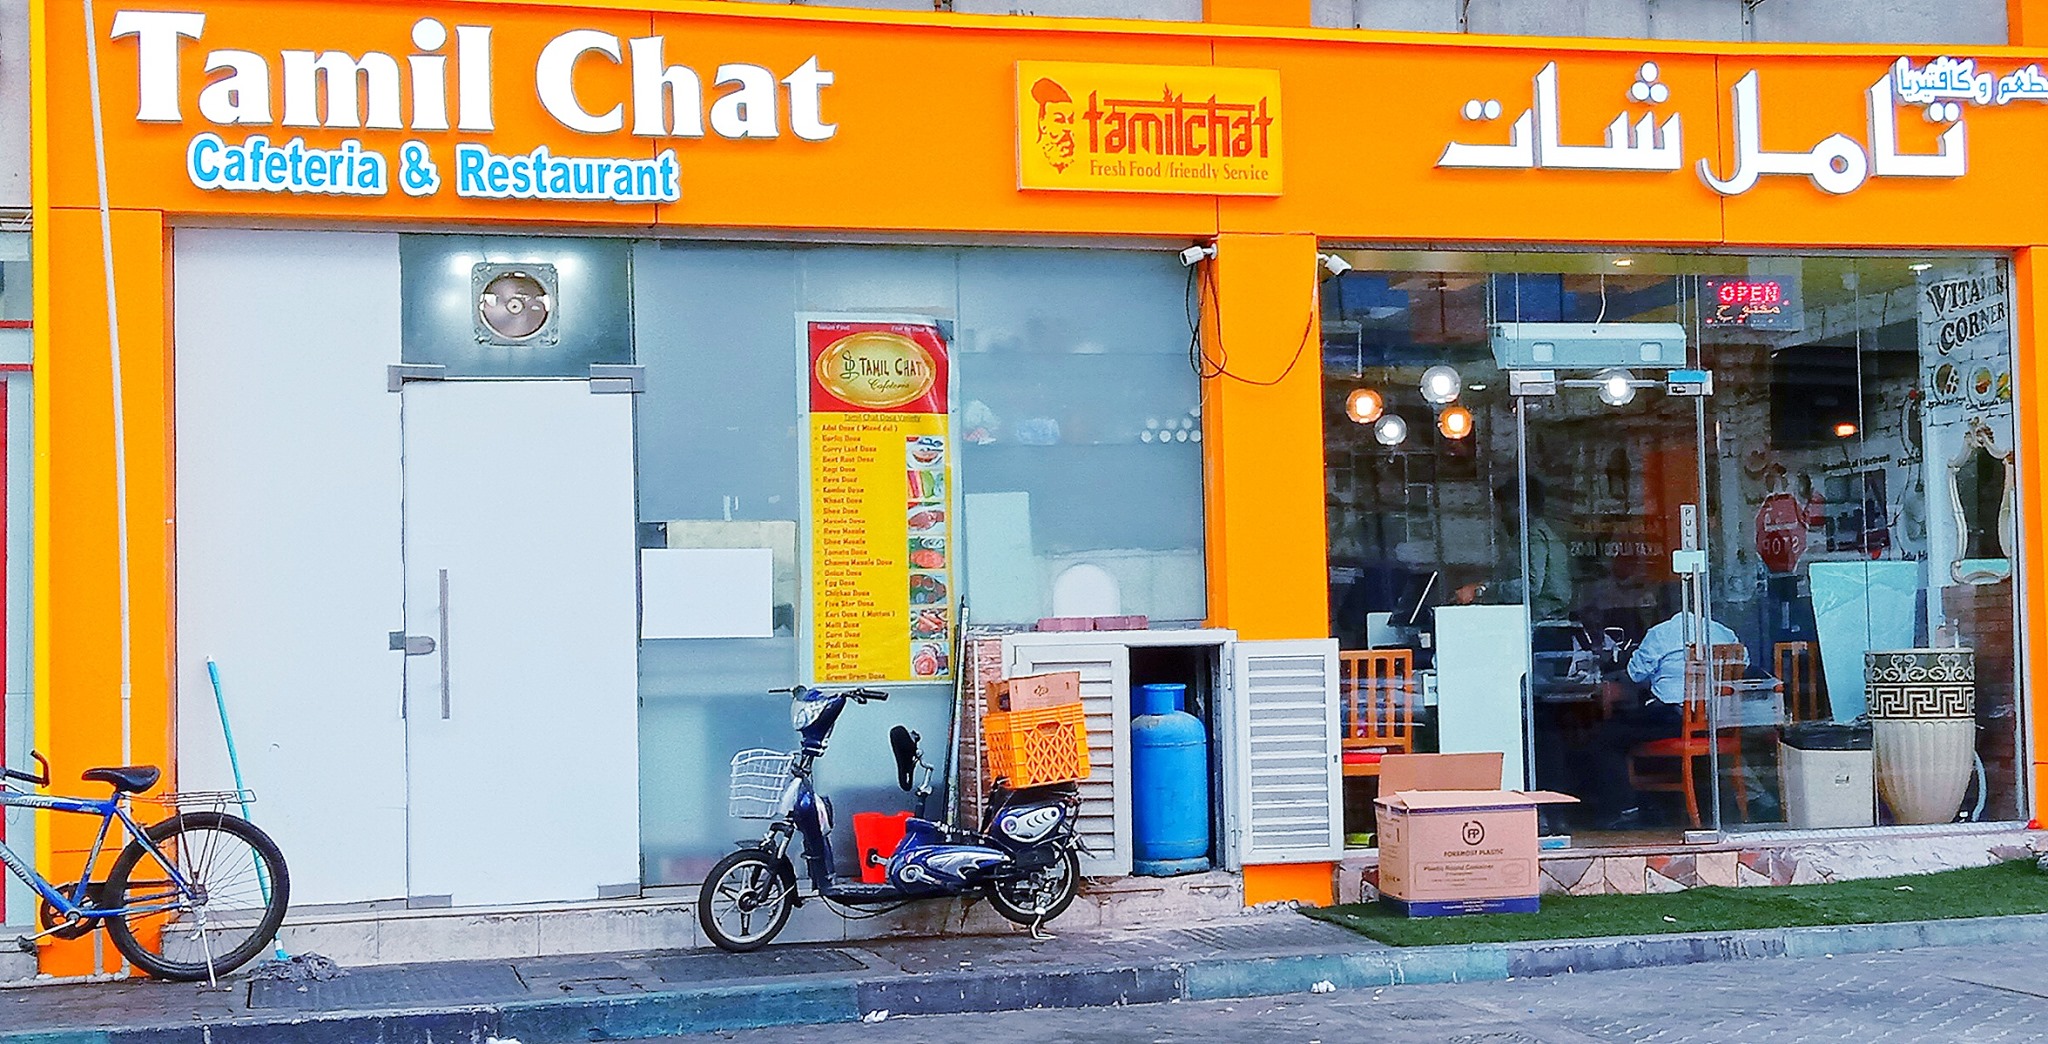 Tamil restaurant and chat in Abu Dhabi and Cafeteria that offer various delicious dishes for workers and foreigners مطعم ودردشة تاميل في أبو ظبي وكافيتيرا يقدم اطباق شهية ومتنوعة للعمال والاجانب